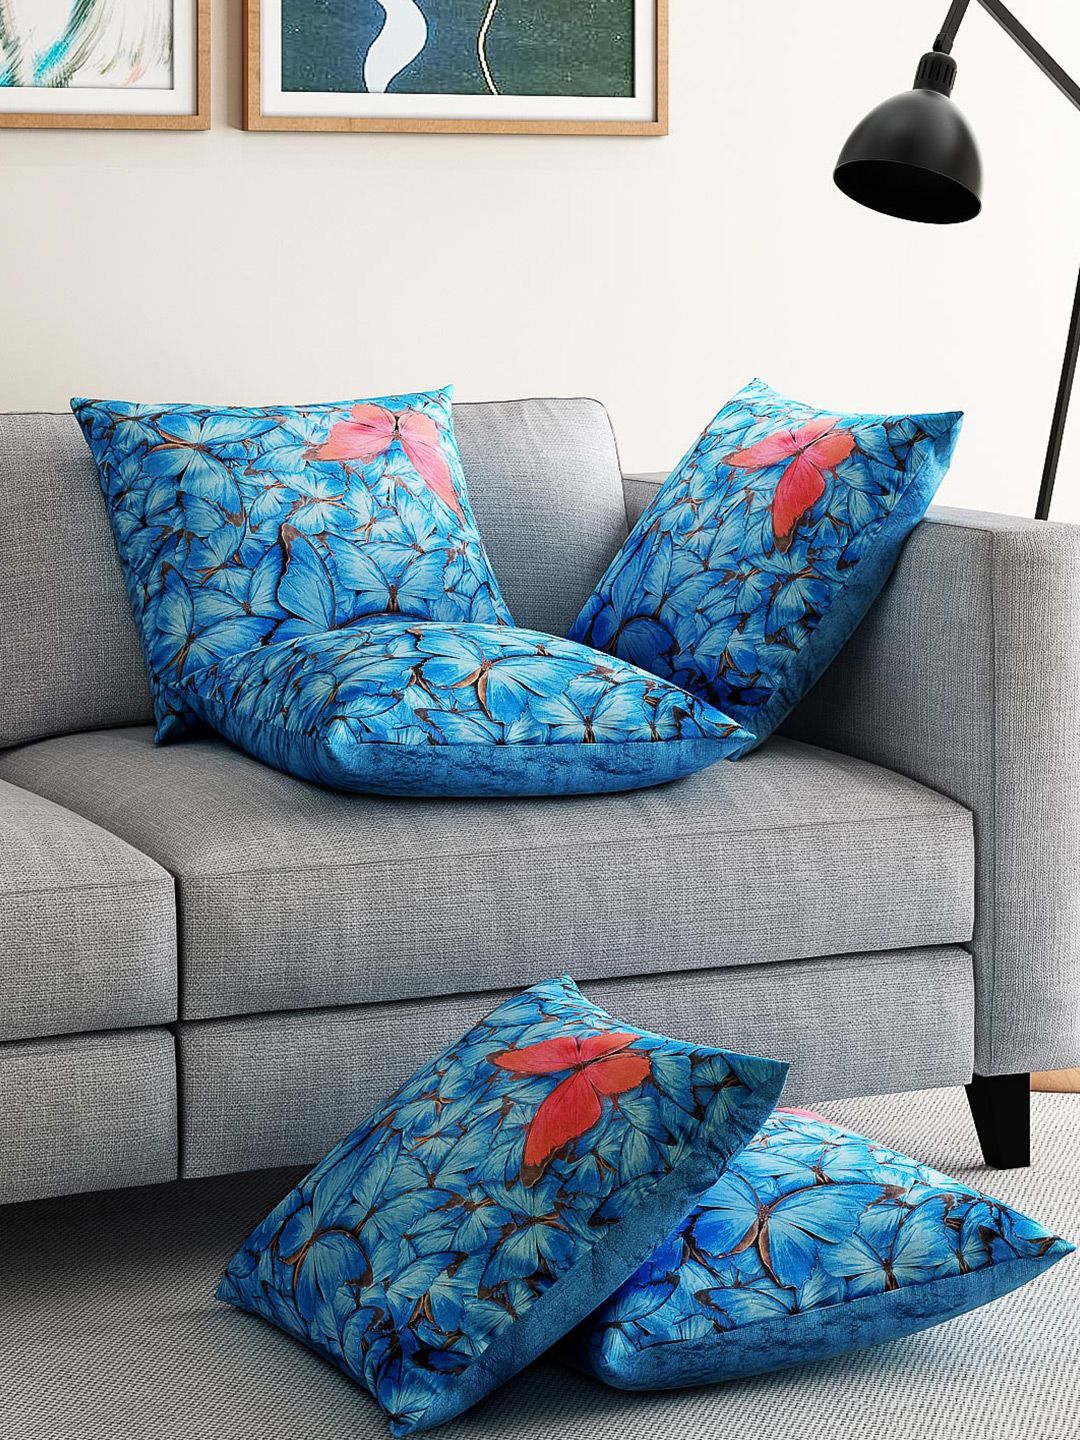 Alina decor Blue Set of 5 Printed 16" x 16" Square Cushion Covers Price in India